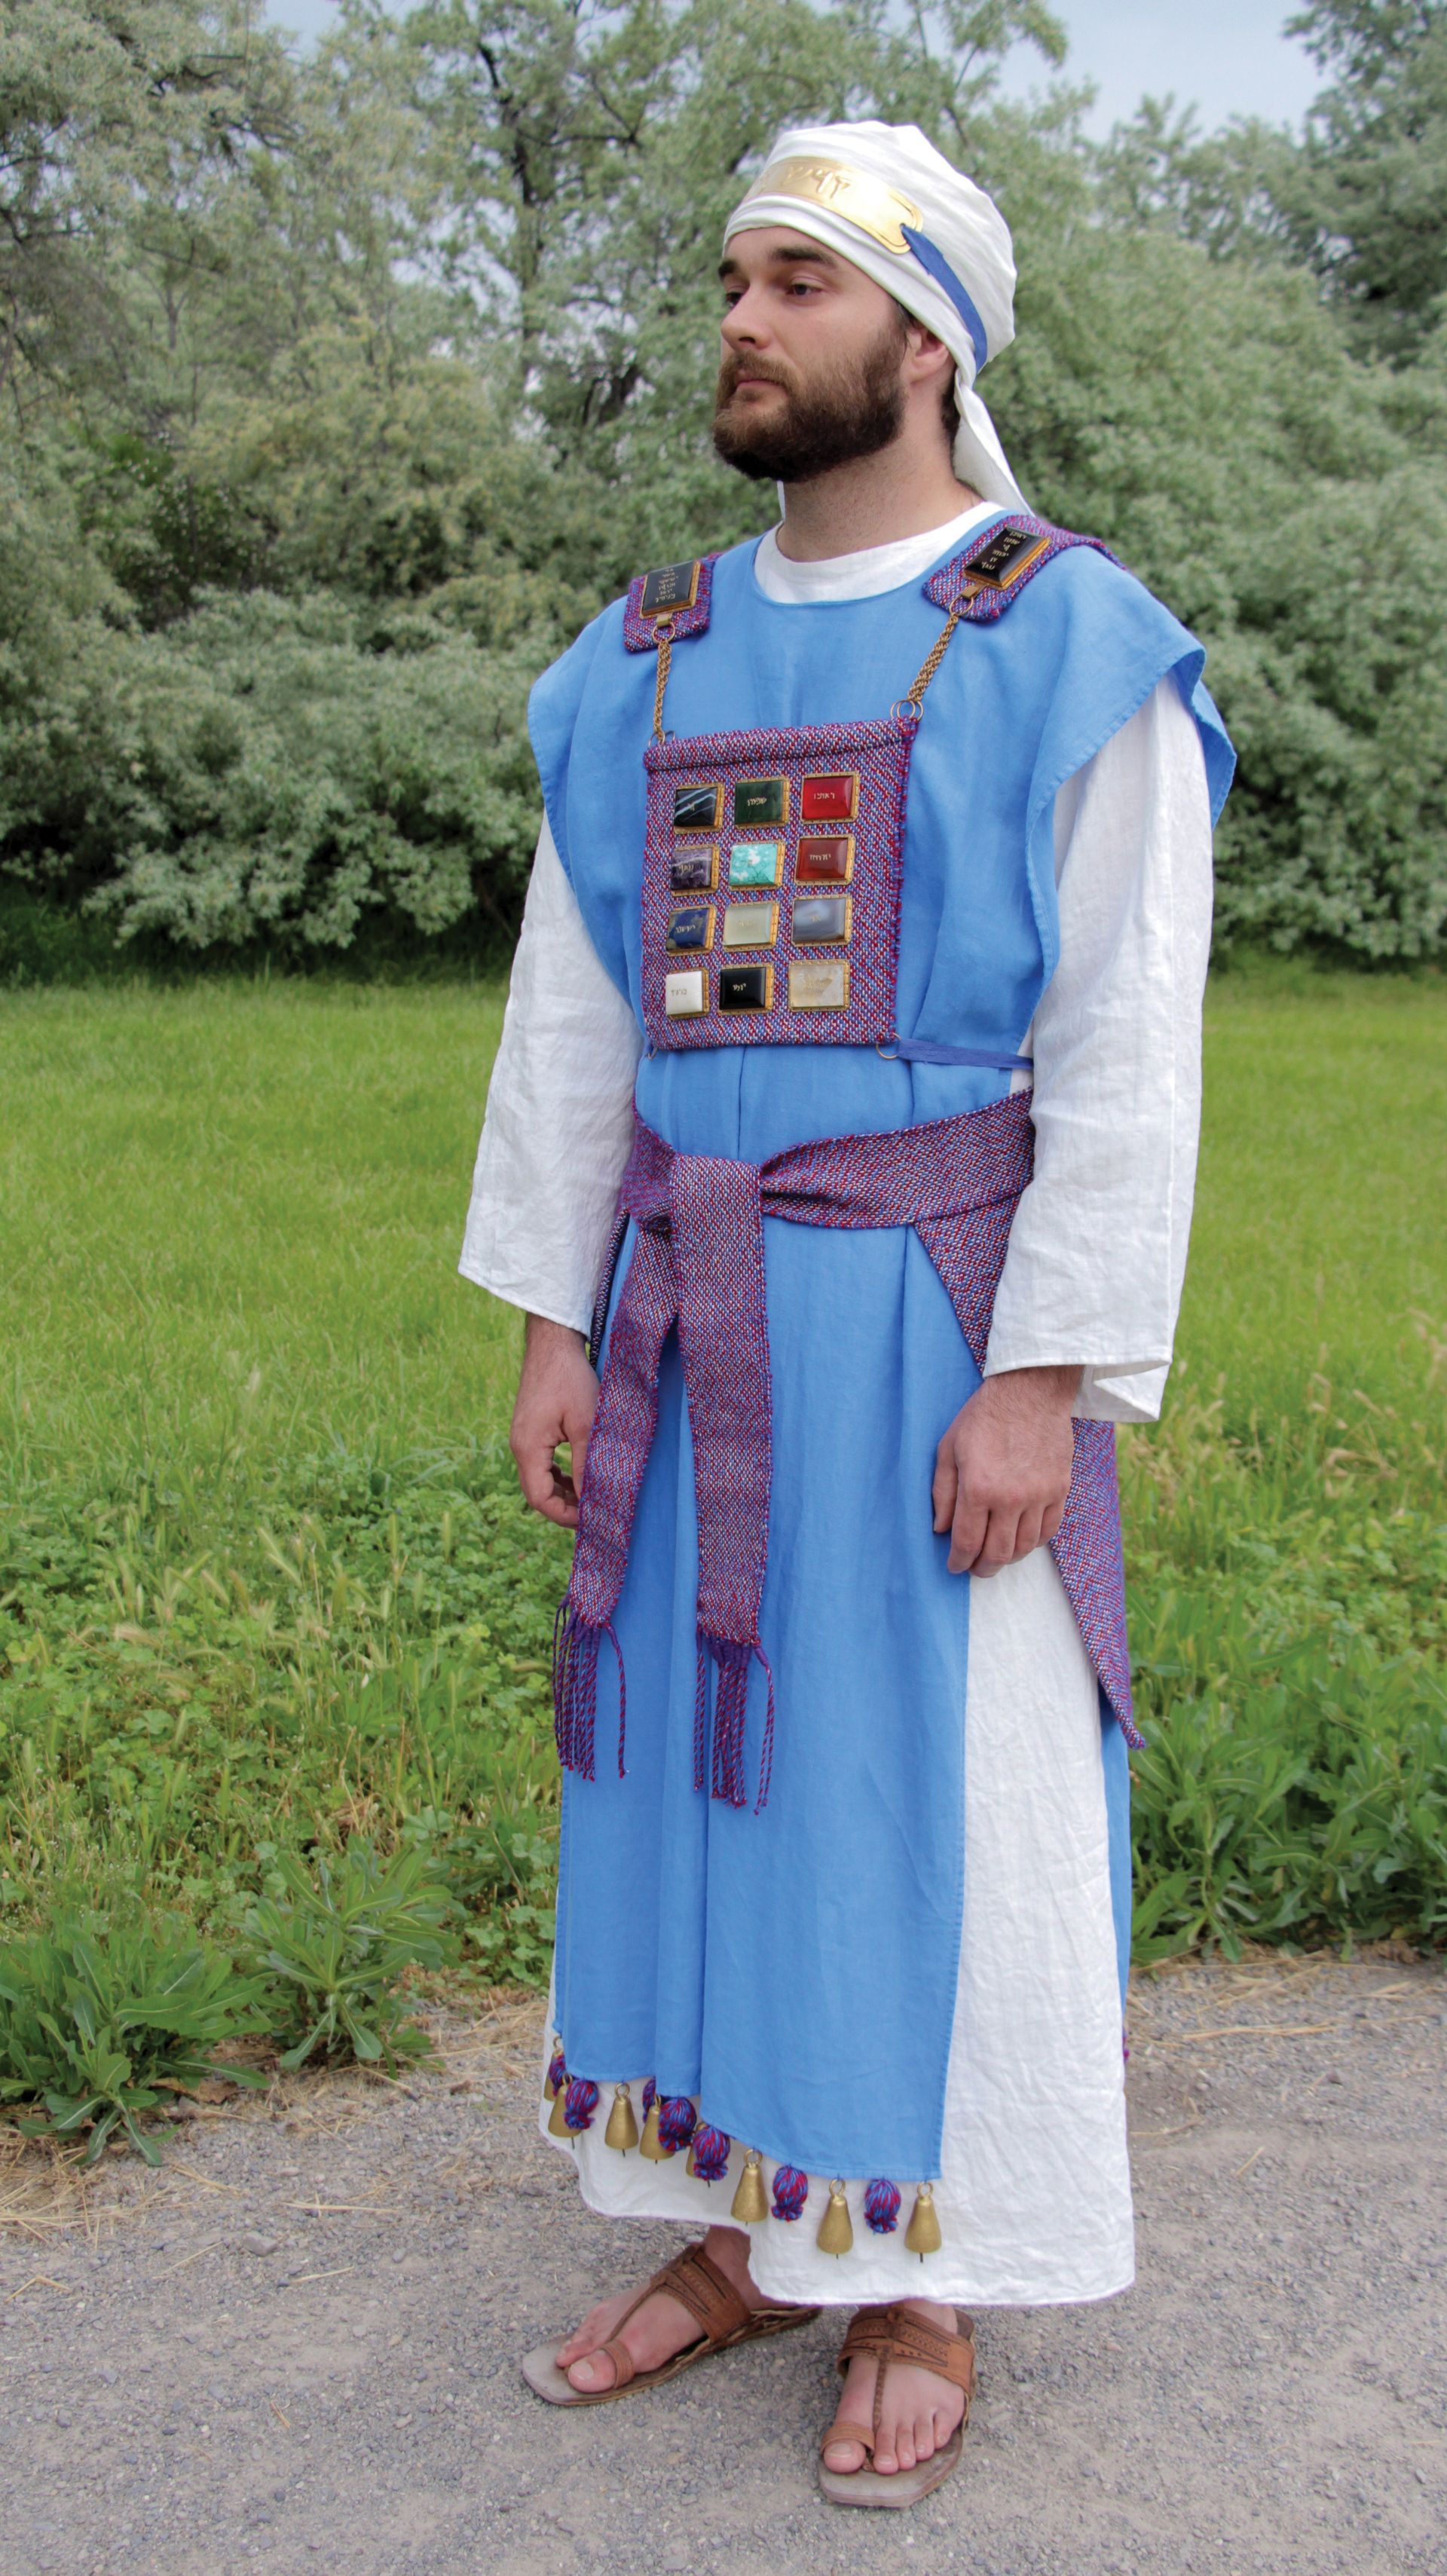 A model wearing the clothing of an Old Testament high priest, created by Israel Daniel Smith.